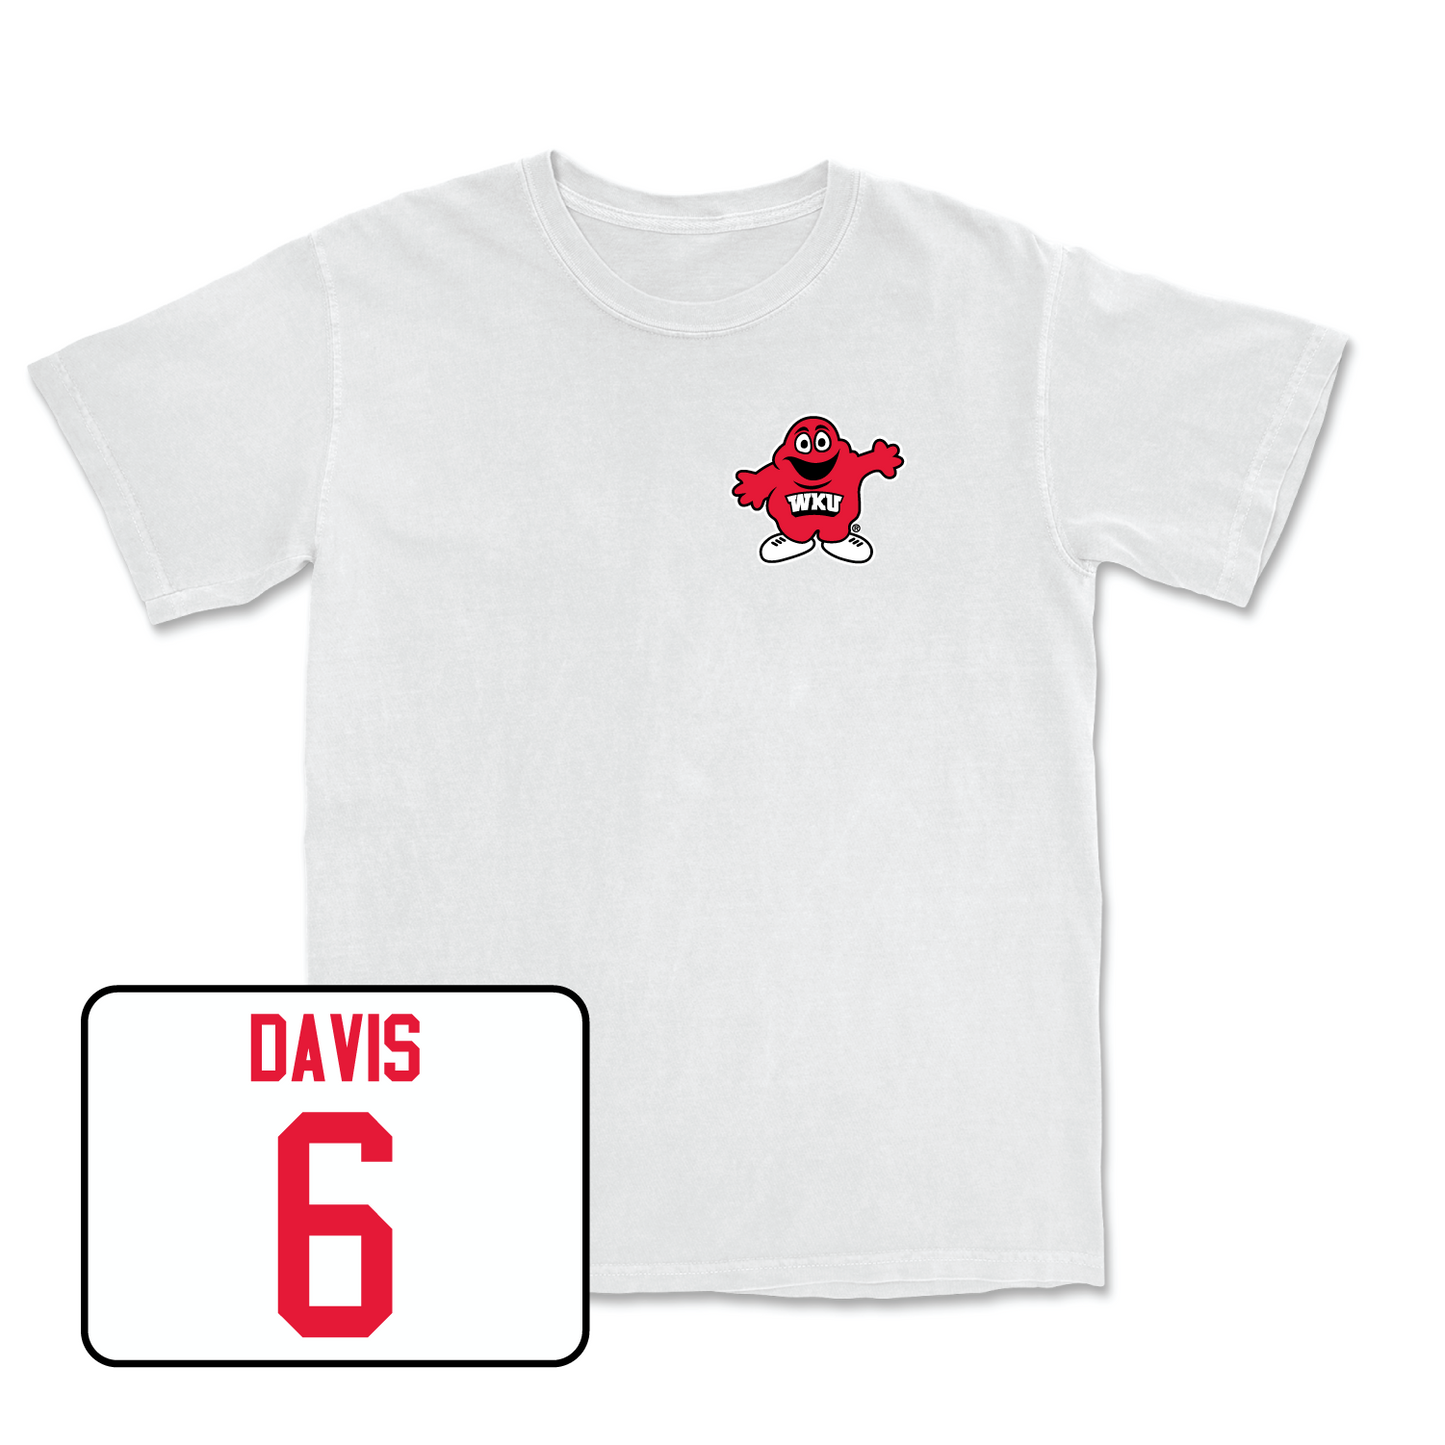 White Women's Soccer Big Red Comfort Colors Tee 4X-Large / Abby Davis | #6